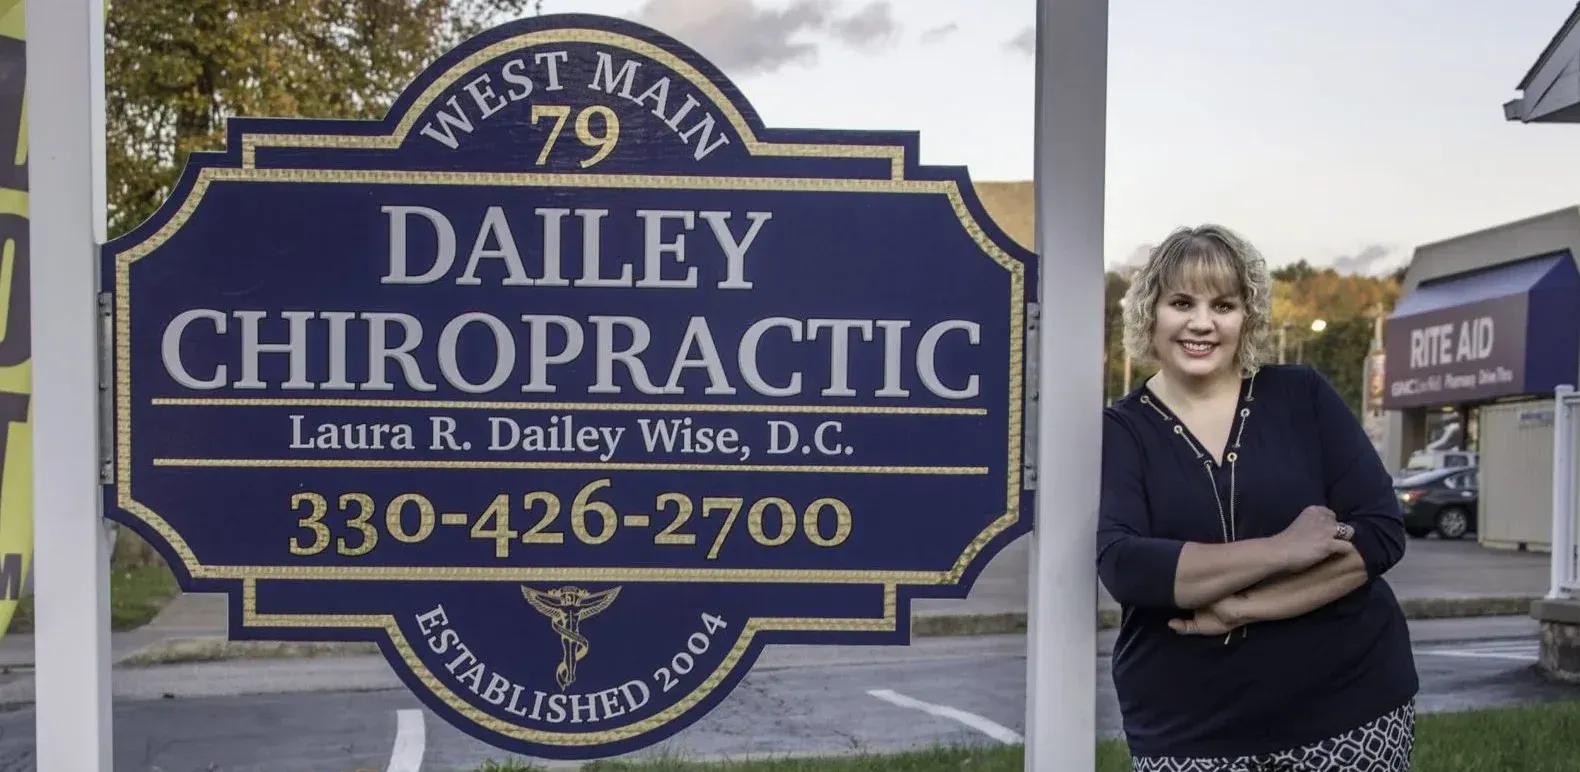 Dailey Chiropractic Picture